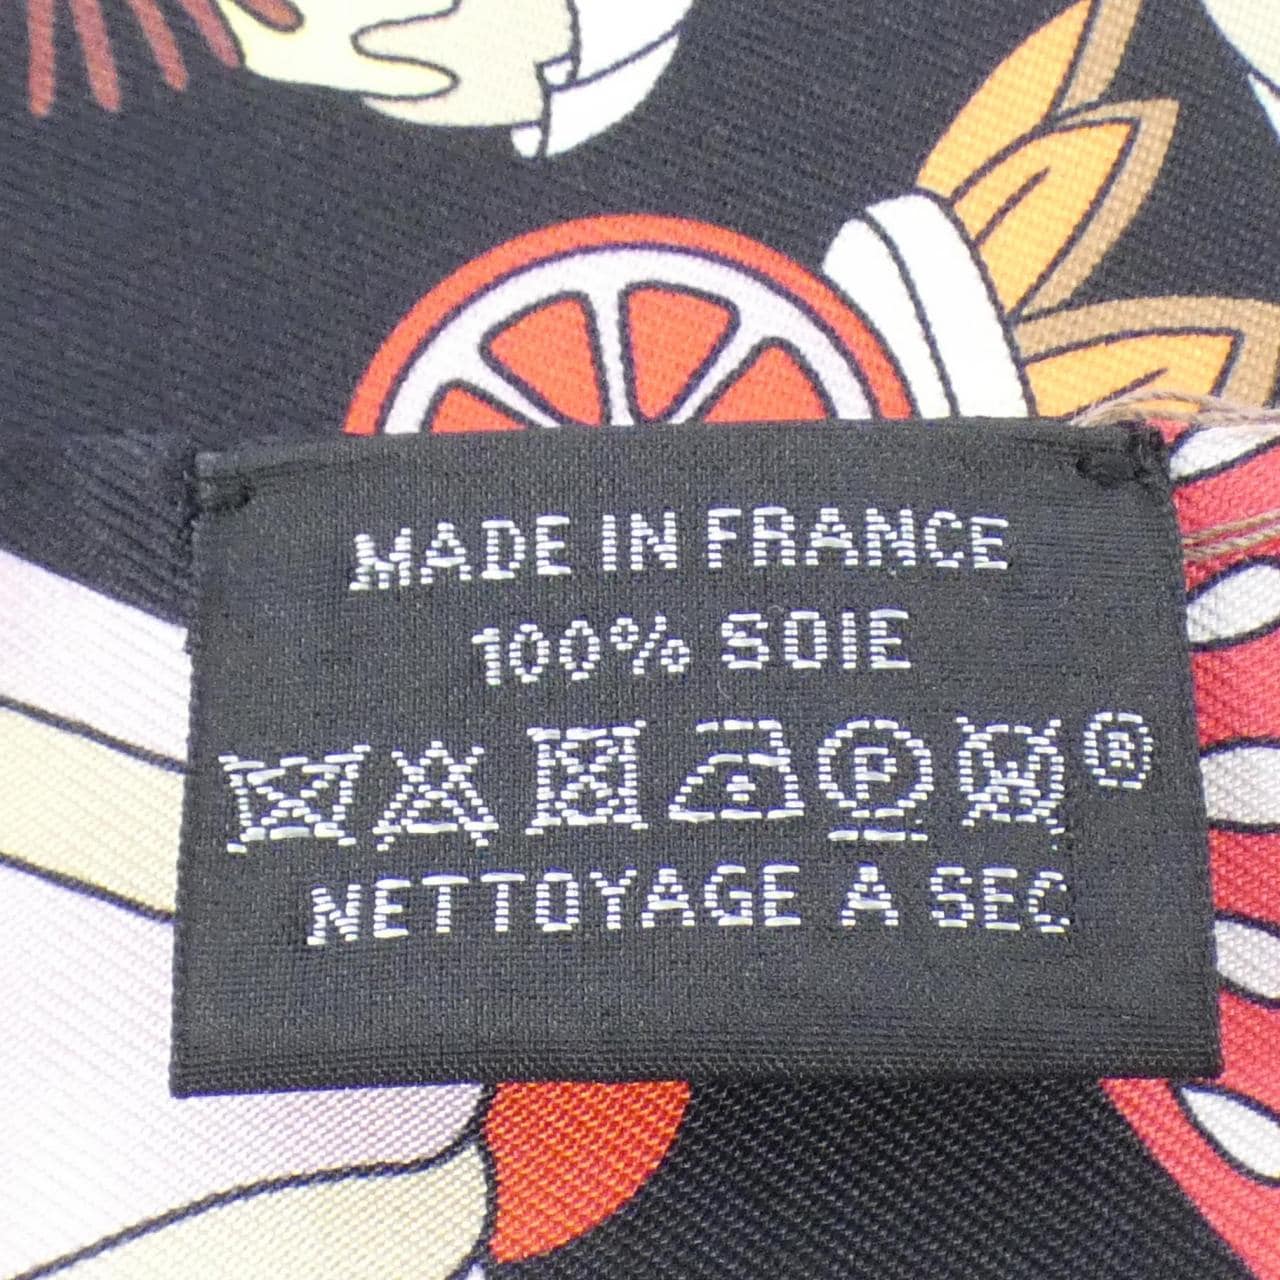 [Unused items] HERMES LA PATISSERIE FRANCAISE Twilly Charm 853336S Scarf